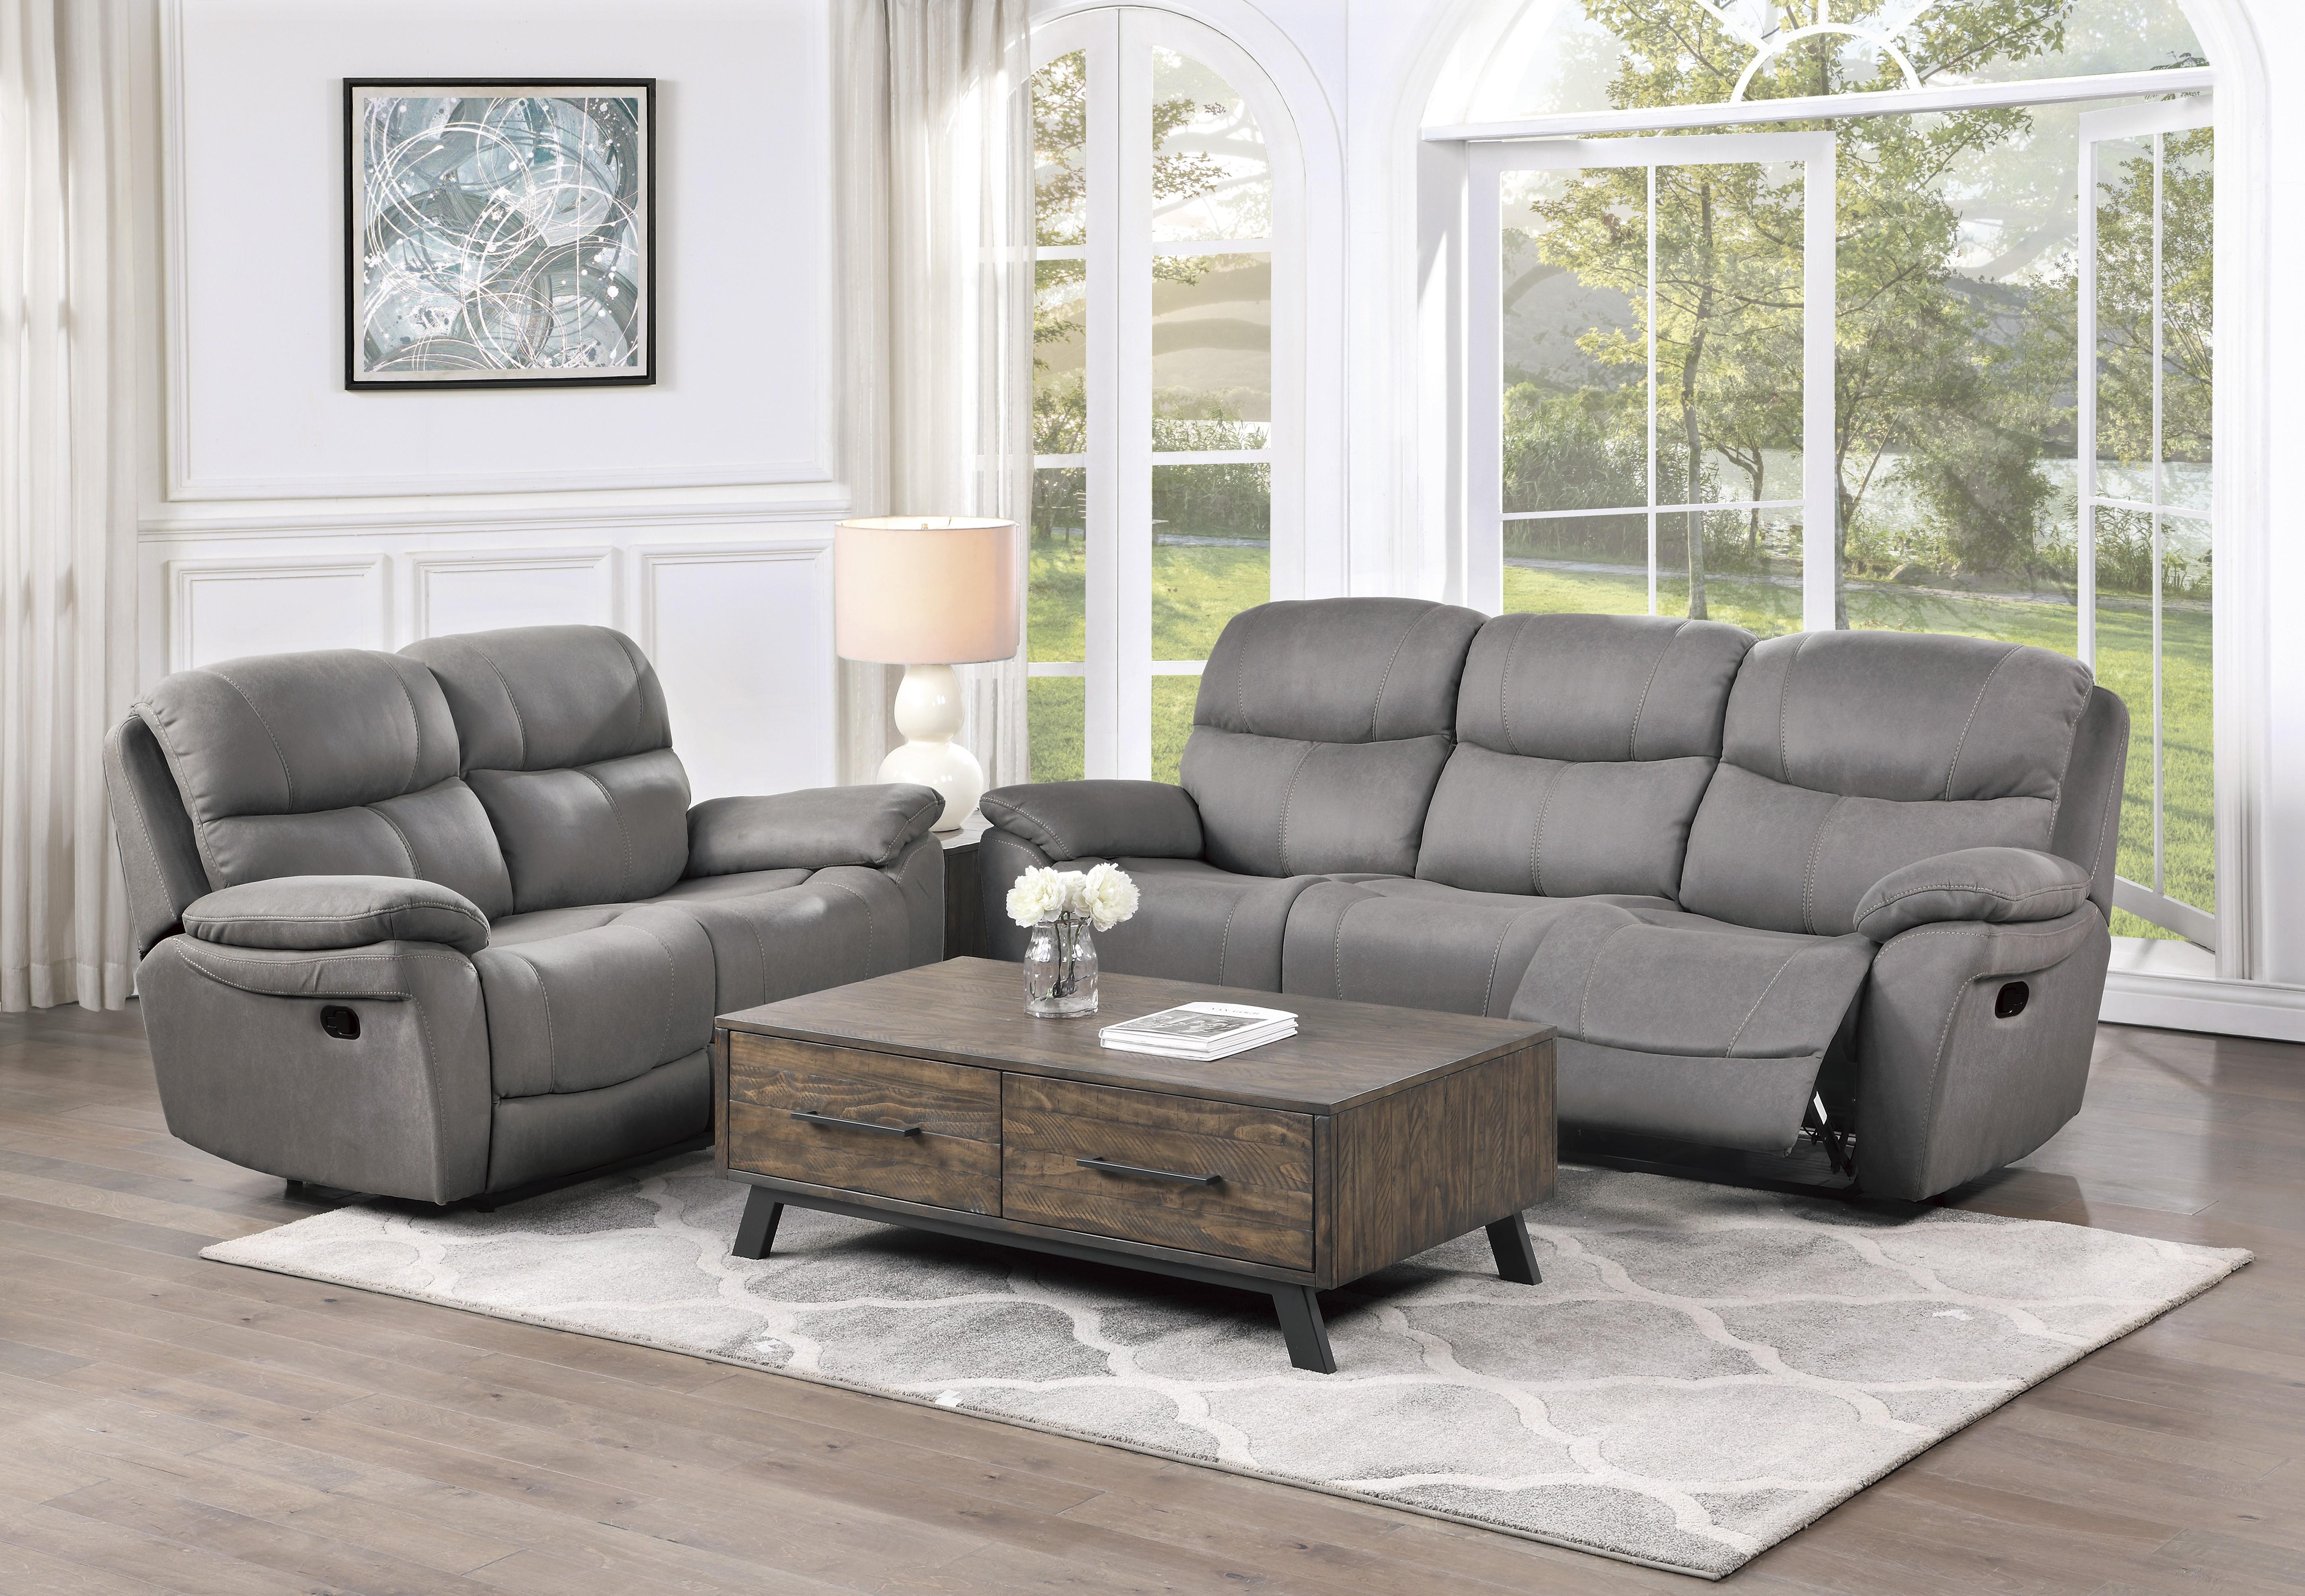 Transitional Reclining Sofa Set 9580GY-2PC Longvale 9580GY-2PC in Gray Microfiber